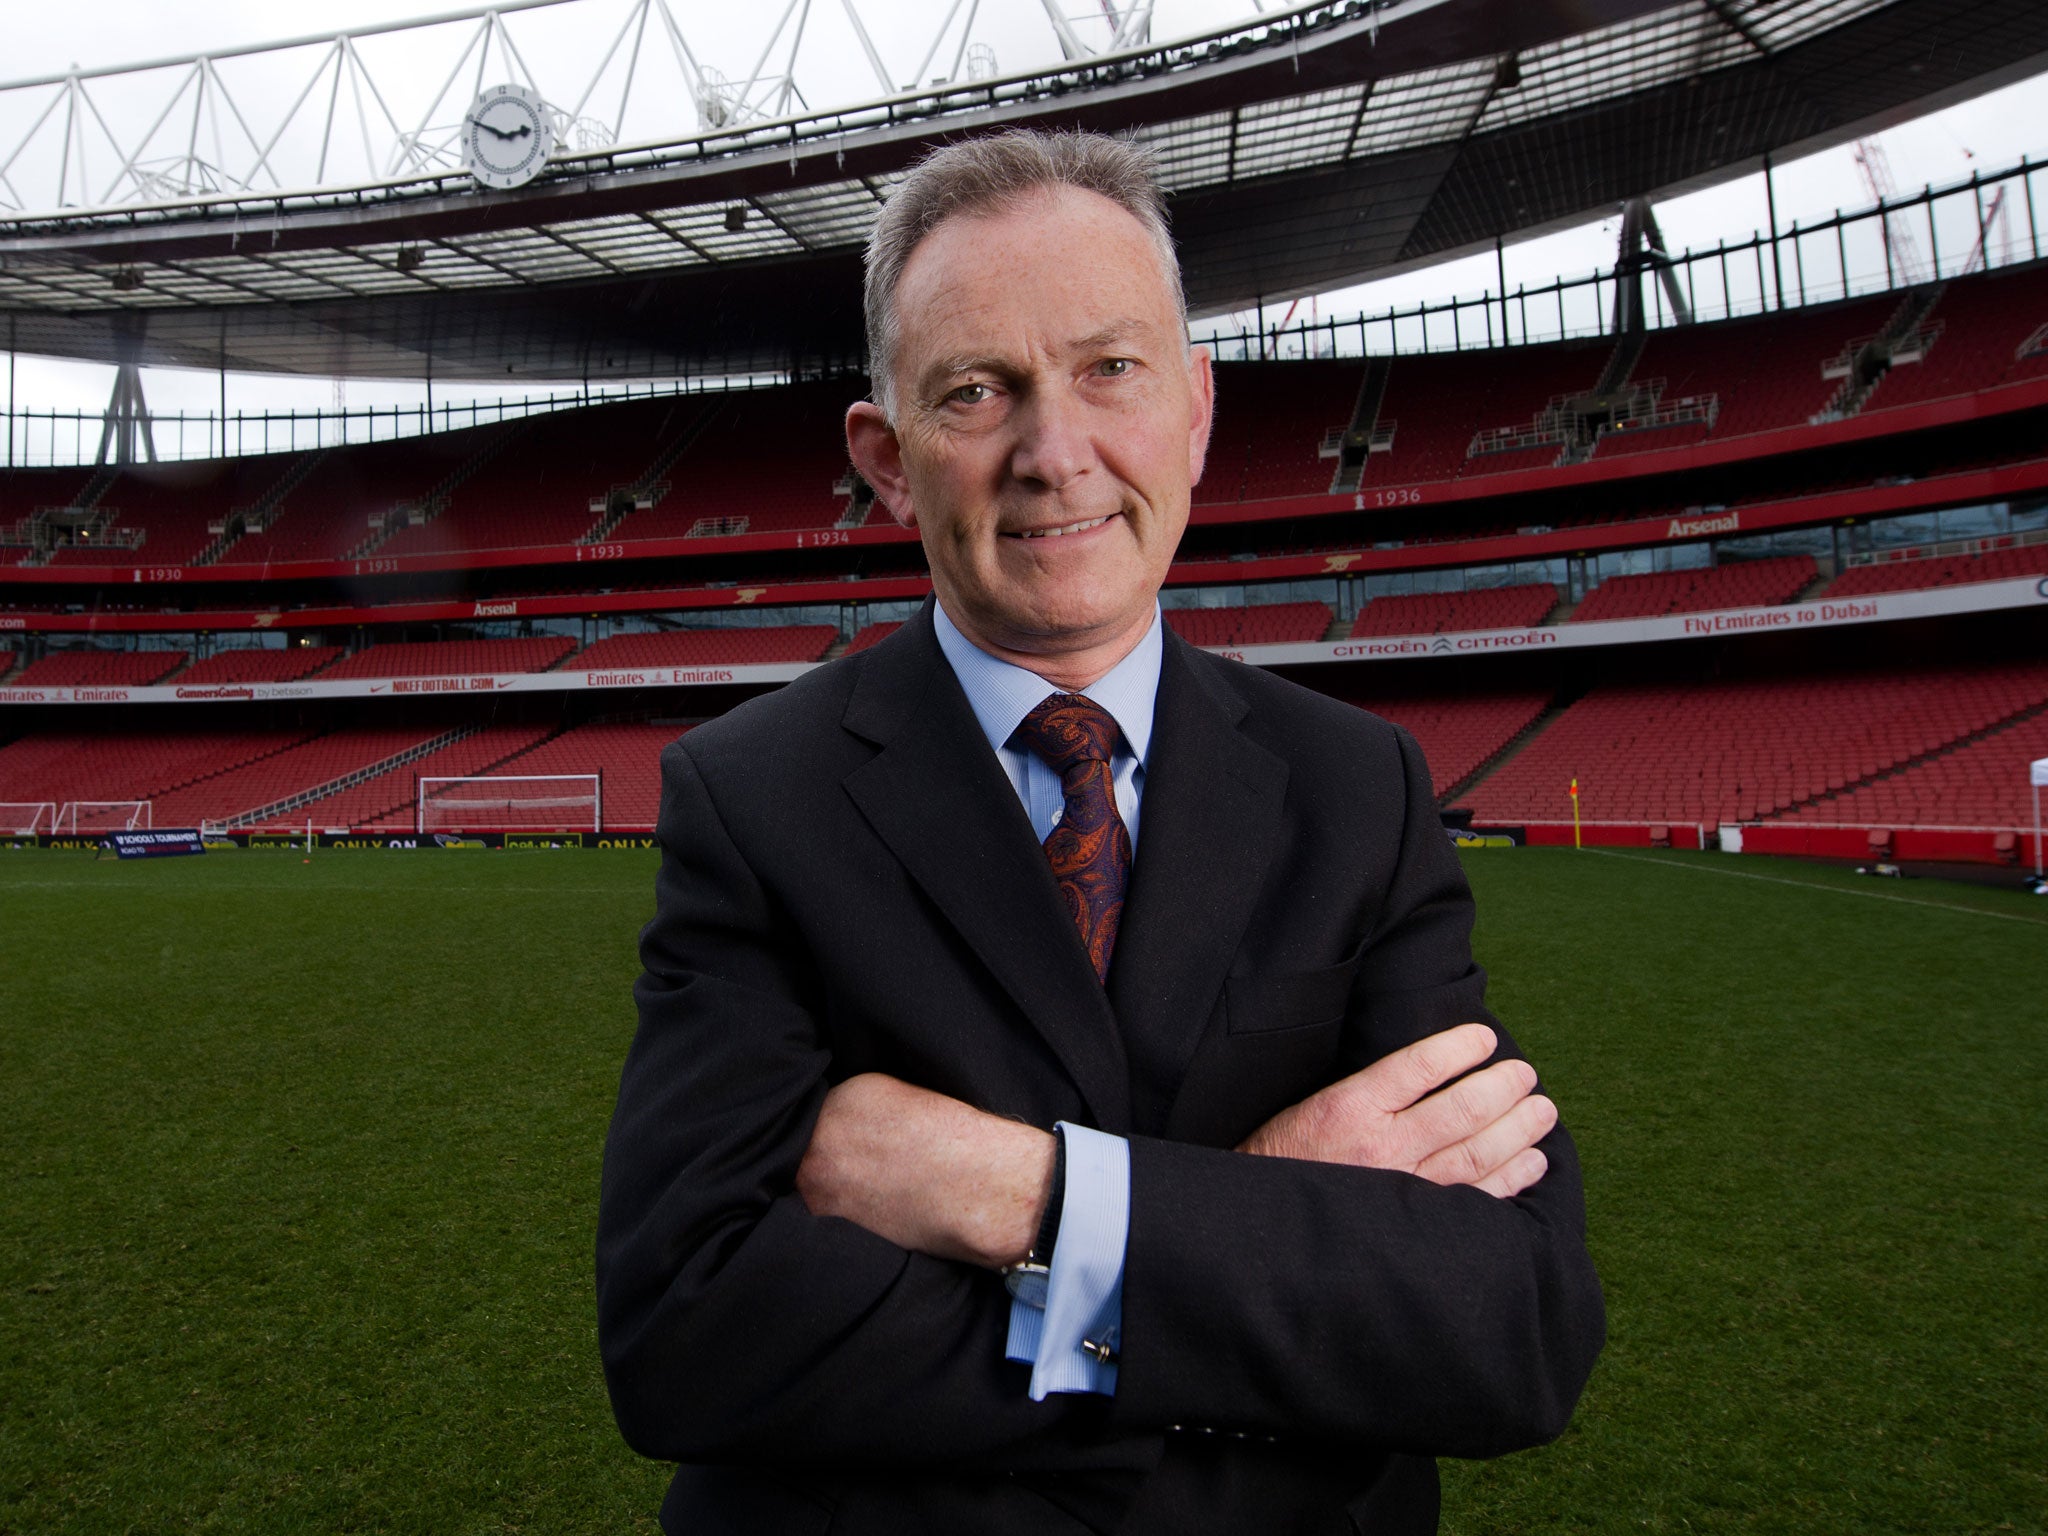 The comments by Richard Scudamore were reportedly made in a ‘Frankie Howerd style way’